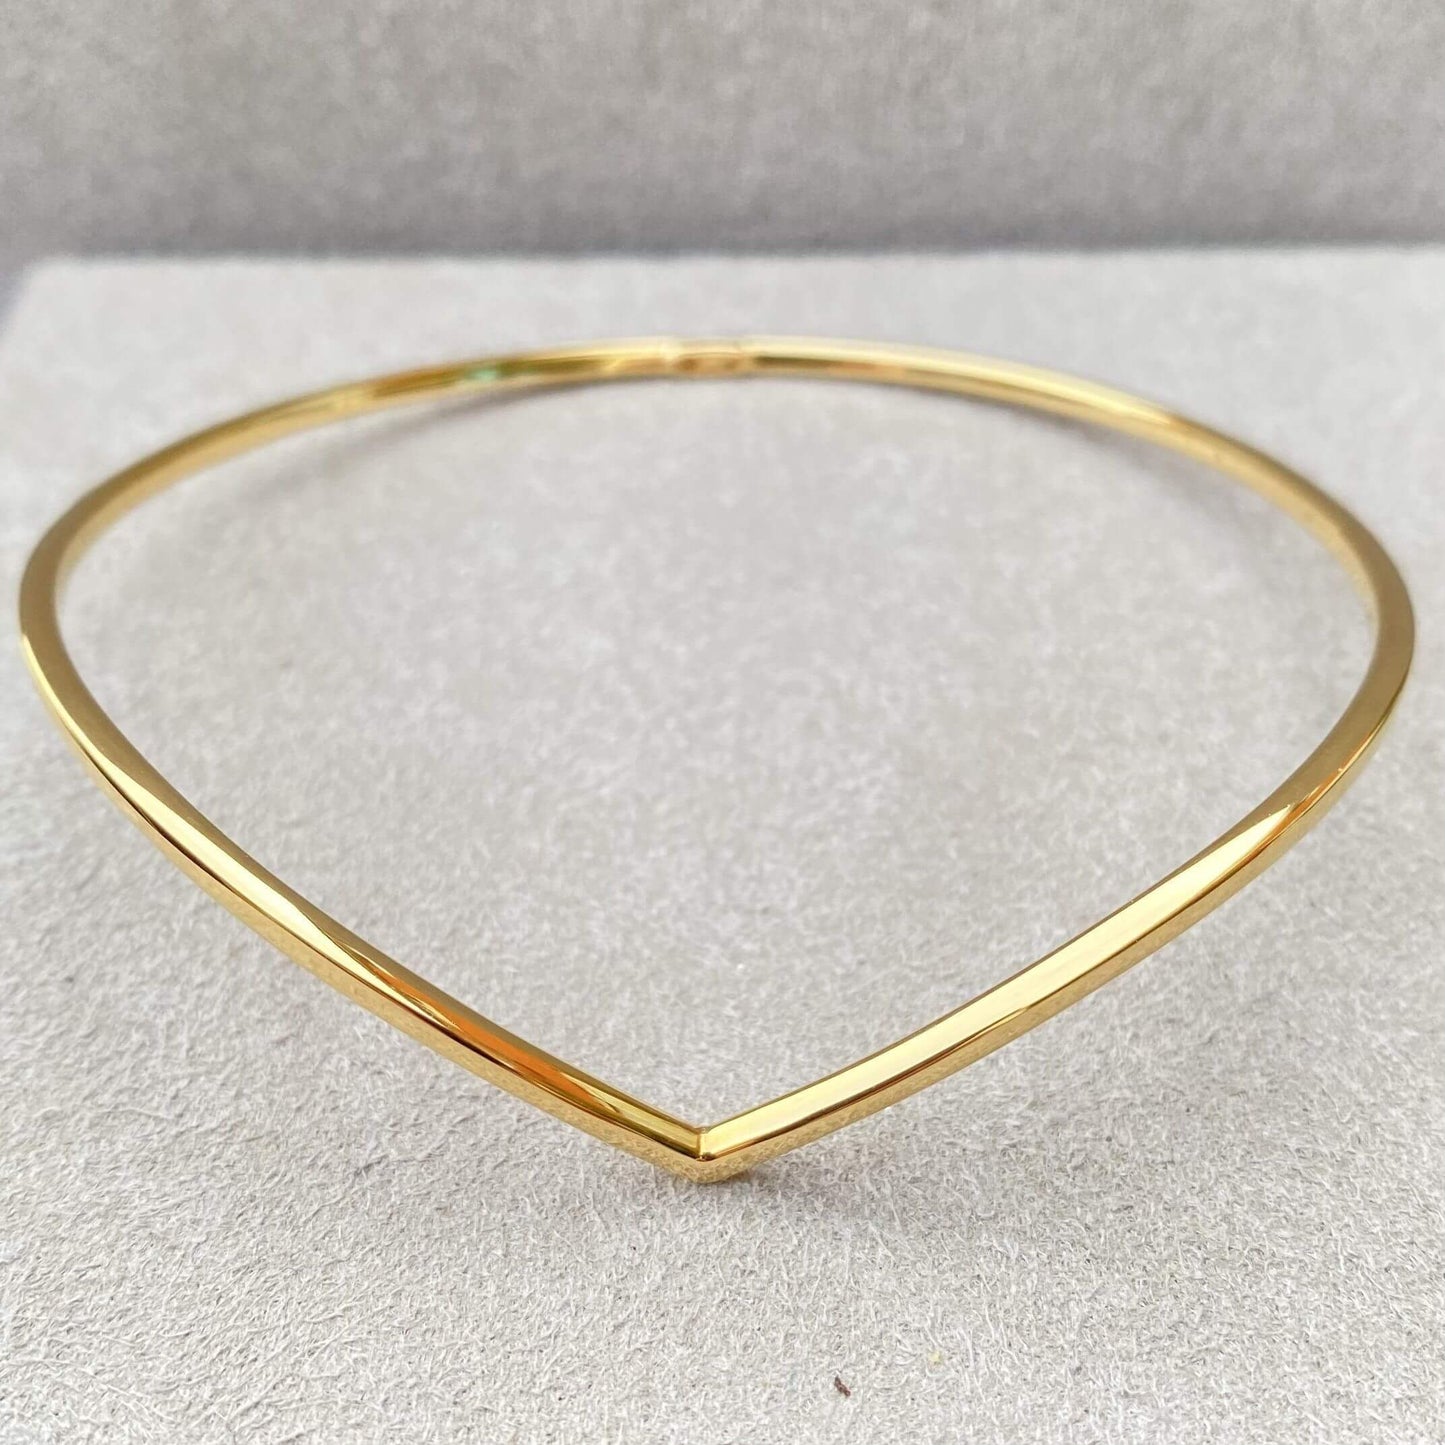 Handmade Sterling Silver Wishbone Bangle in 18 Carat Yellow or Rose Gold Vermeil - Twelve Silver Trees